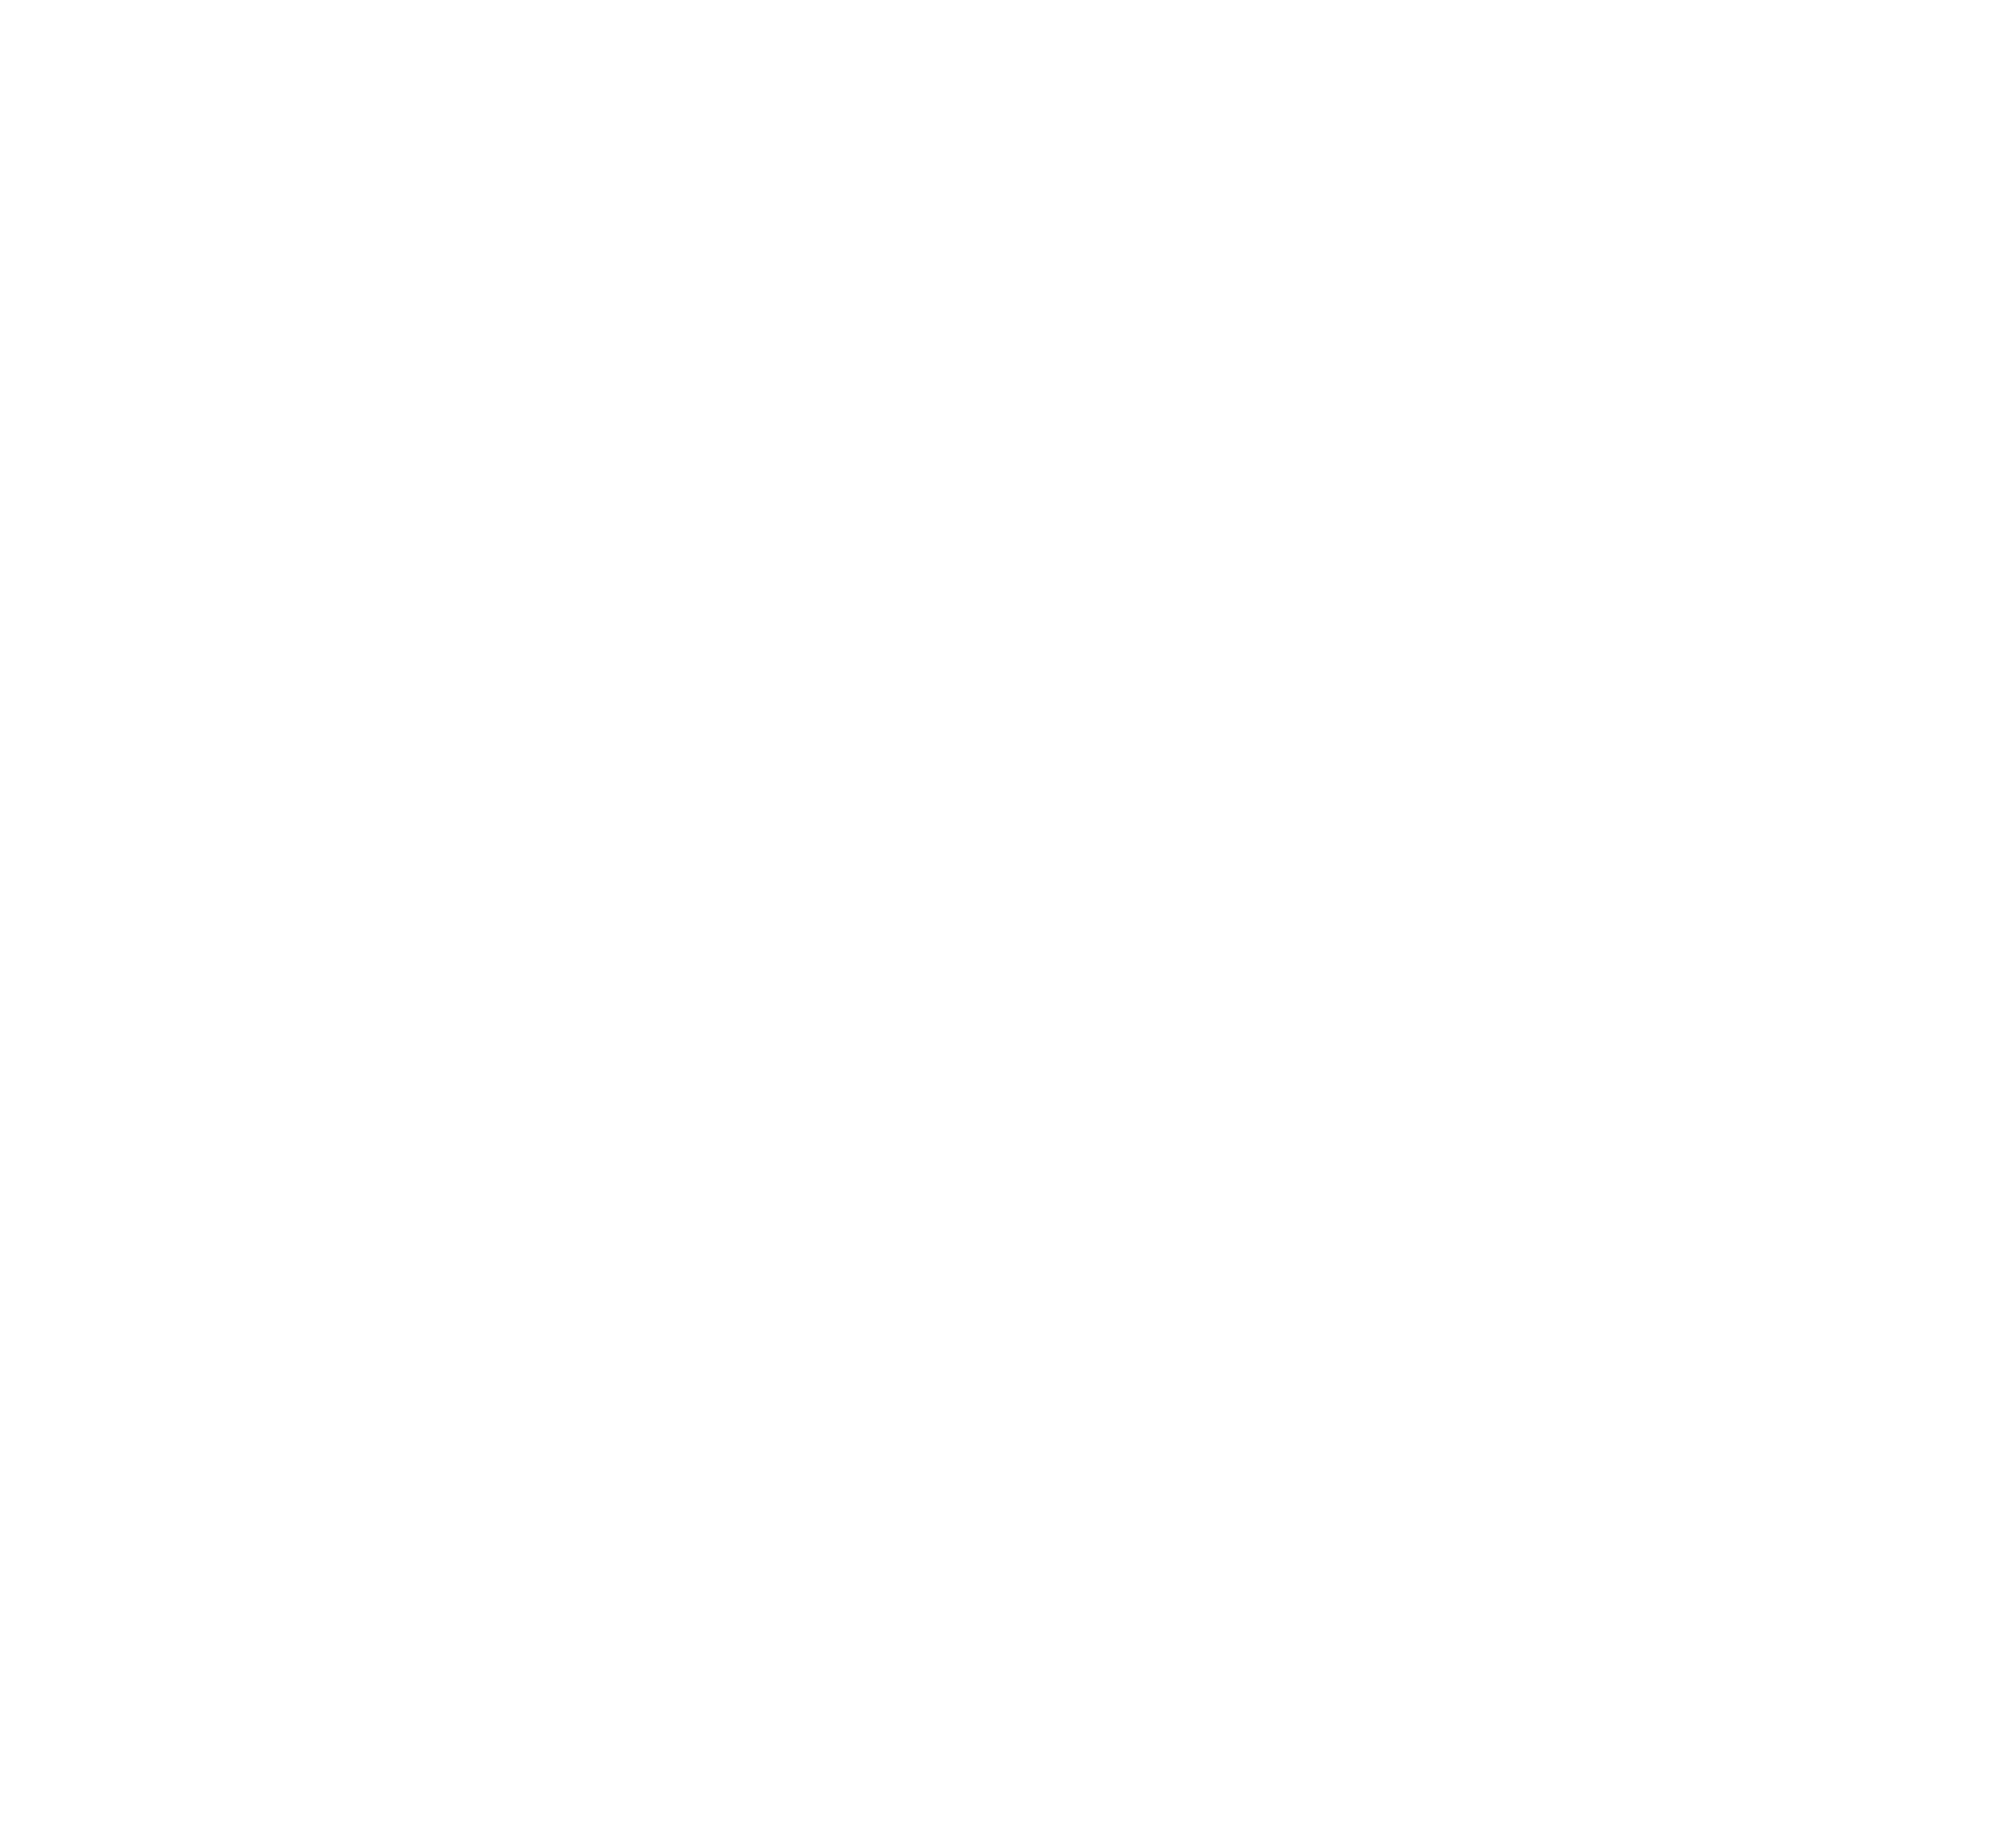 Contact French Press Bakery And Cafe